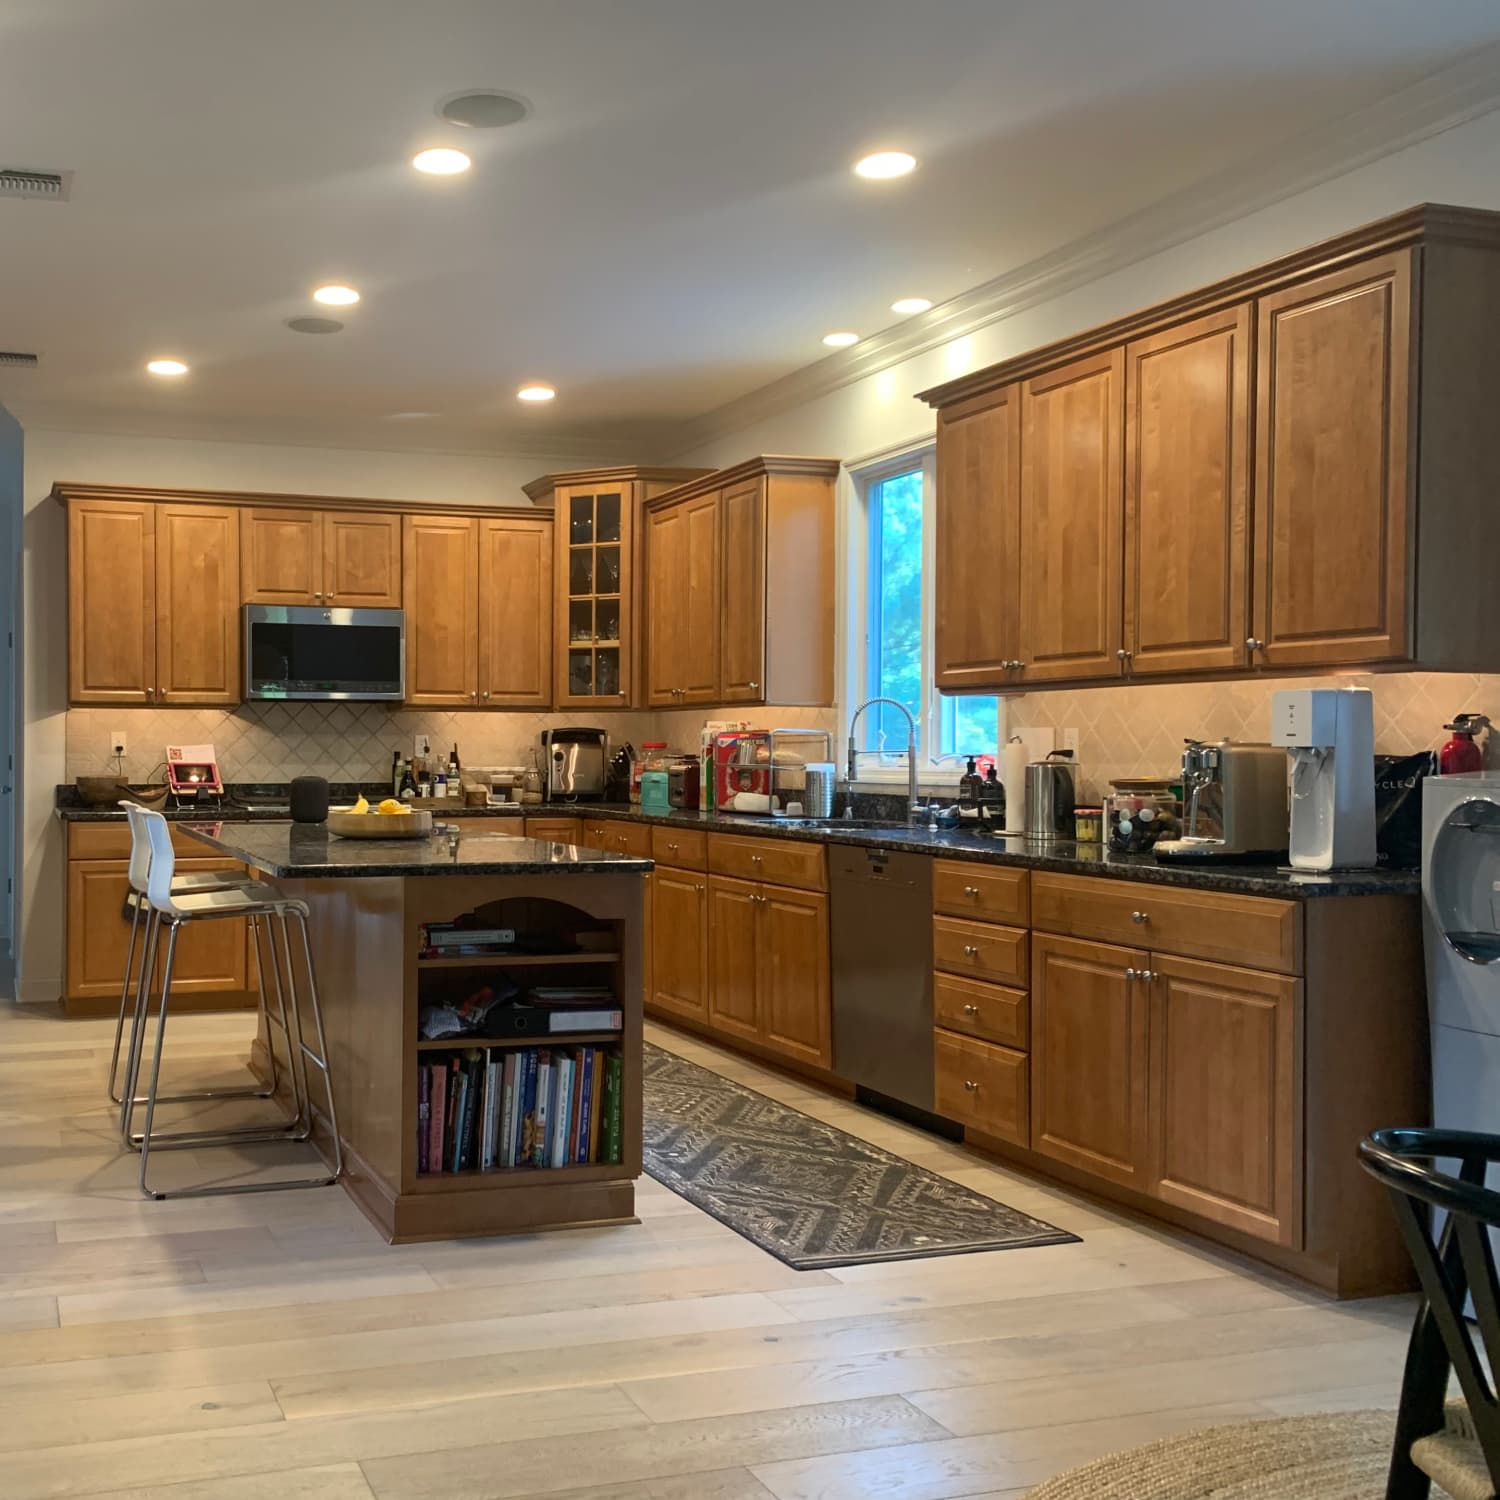 Refinish Kitchen Cabinets Before or After New Countertops?